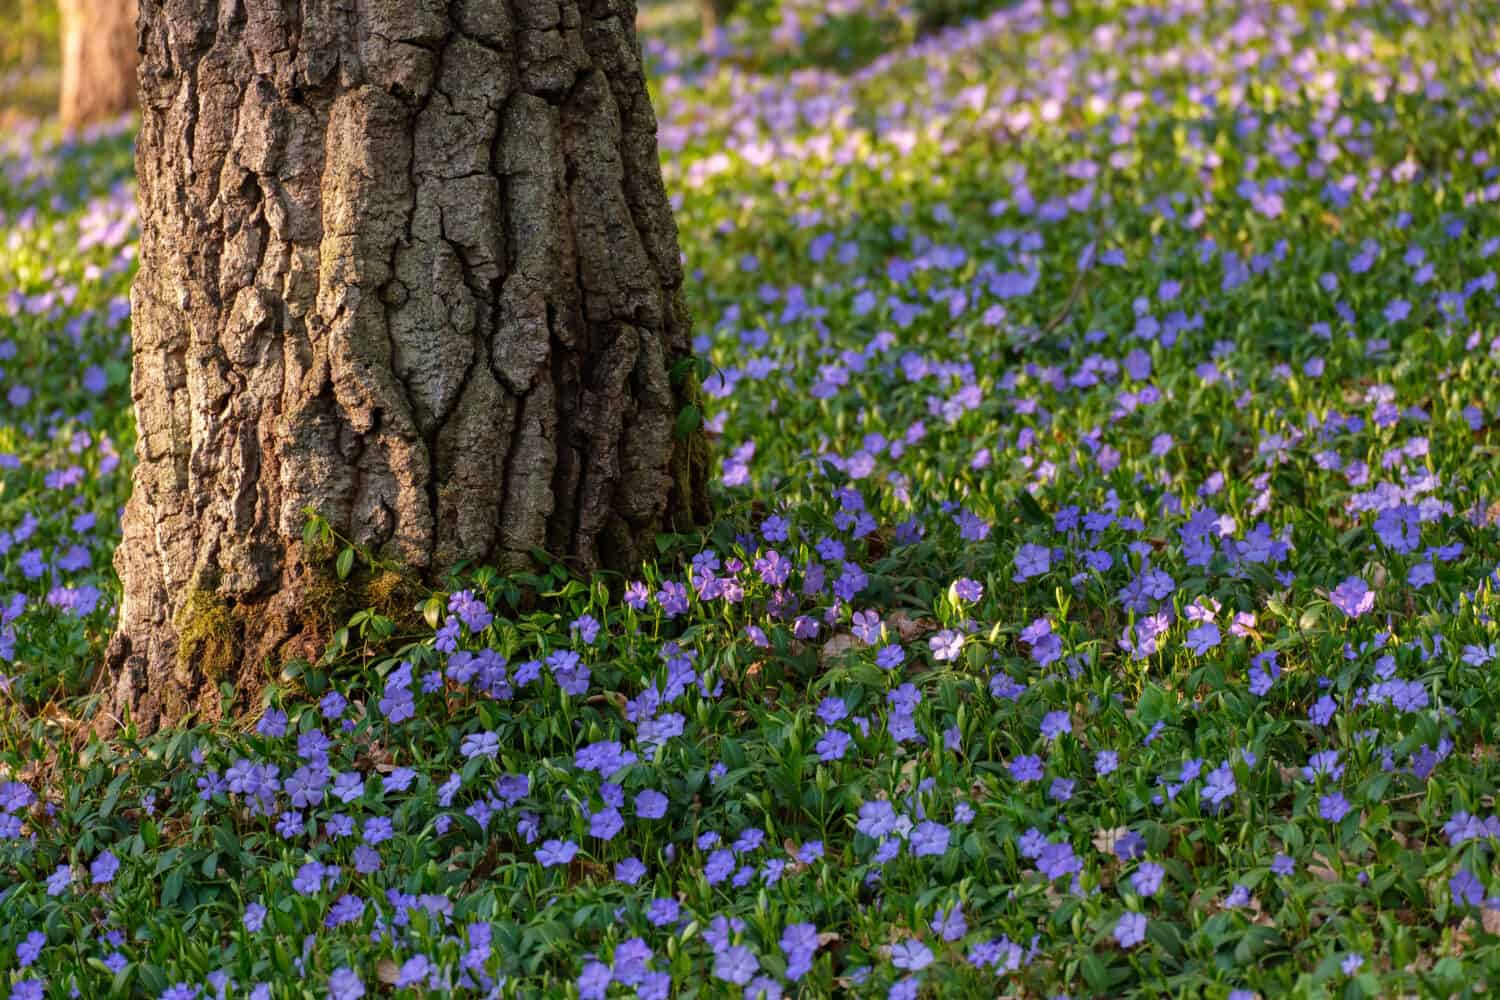 Blooming spring forest with old oak trees. Blooming and juicy Vinca minor under the trees, natural floral background pattern. Discover the beauty of the spring forest.